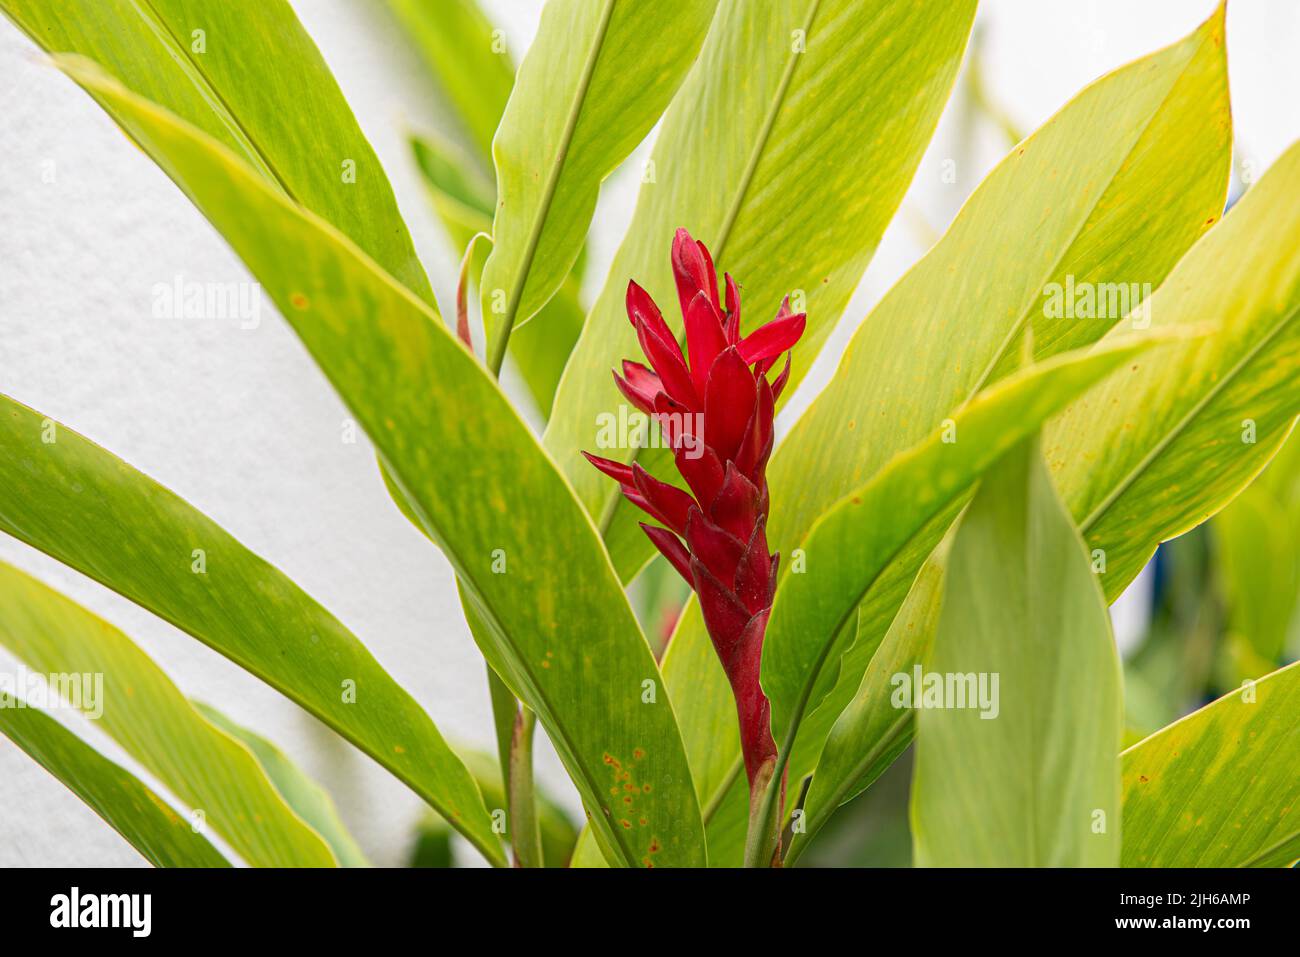 Alpinia purpurata is a species of perennial plant in the Zingiberaceae family, known by the common names of red ginger and alpinia, used as an ornamen Stock Photo